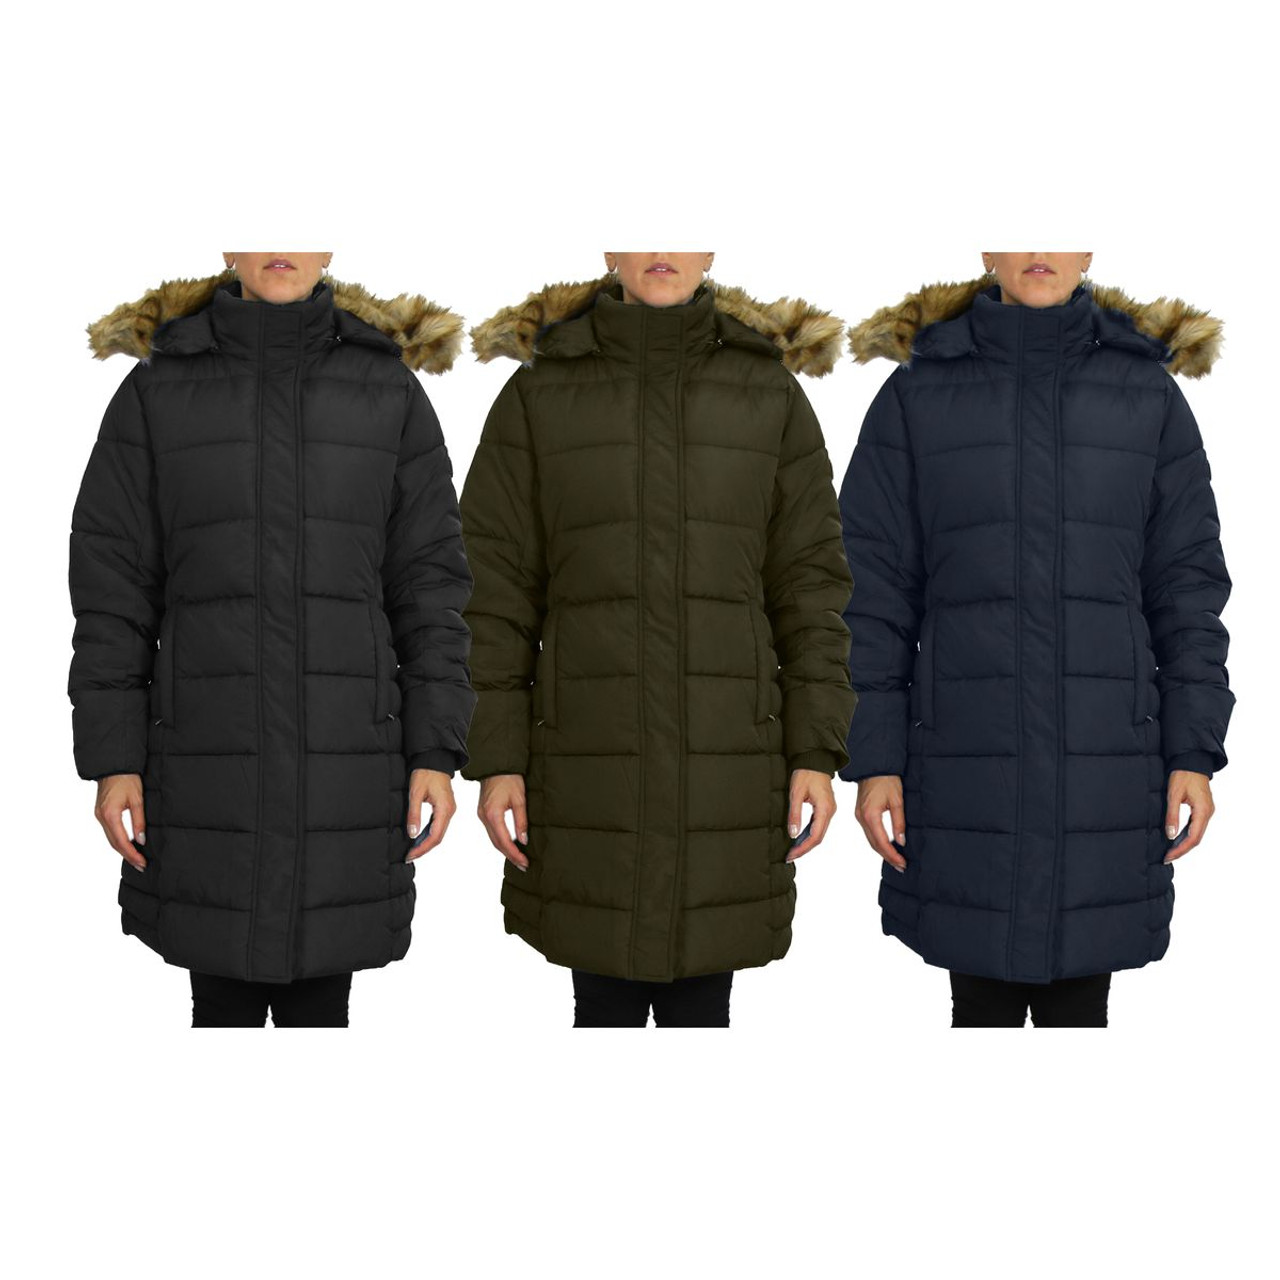 Women's Heavyweight Parka with Detachable Faux Fur Hood product image